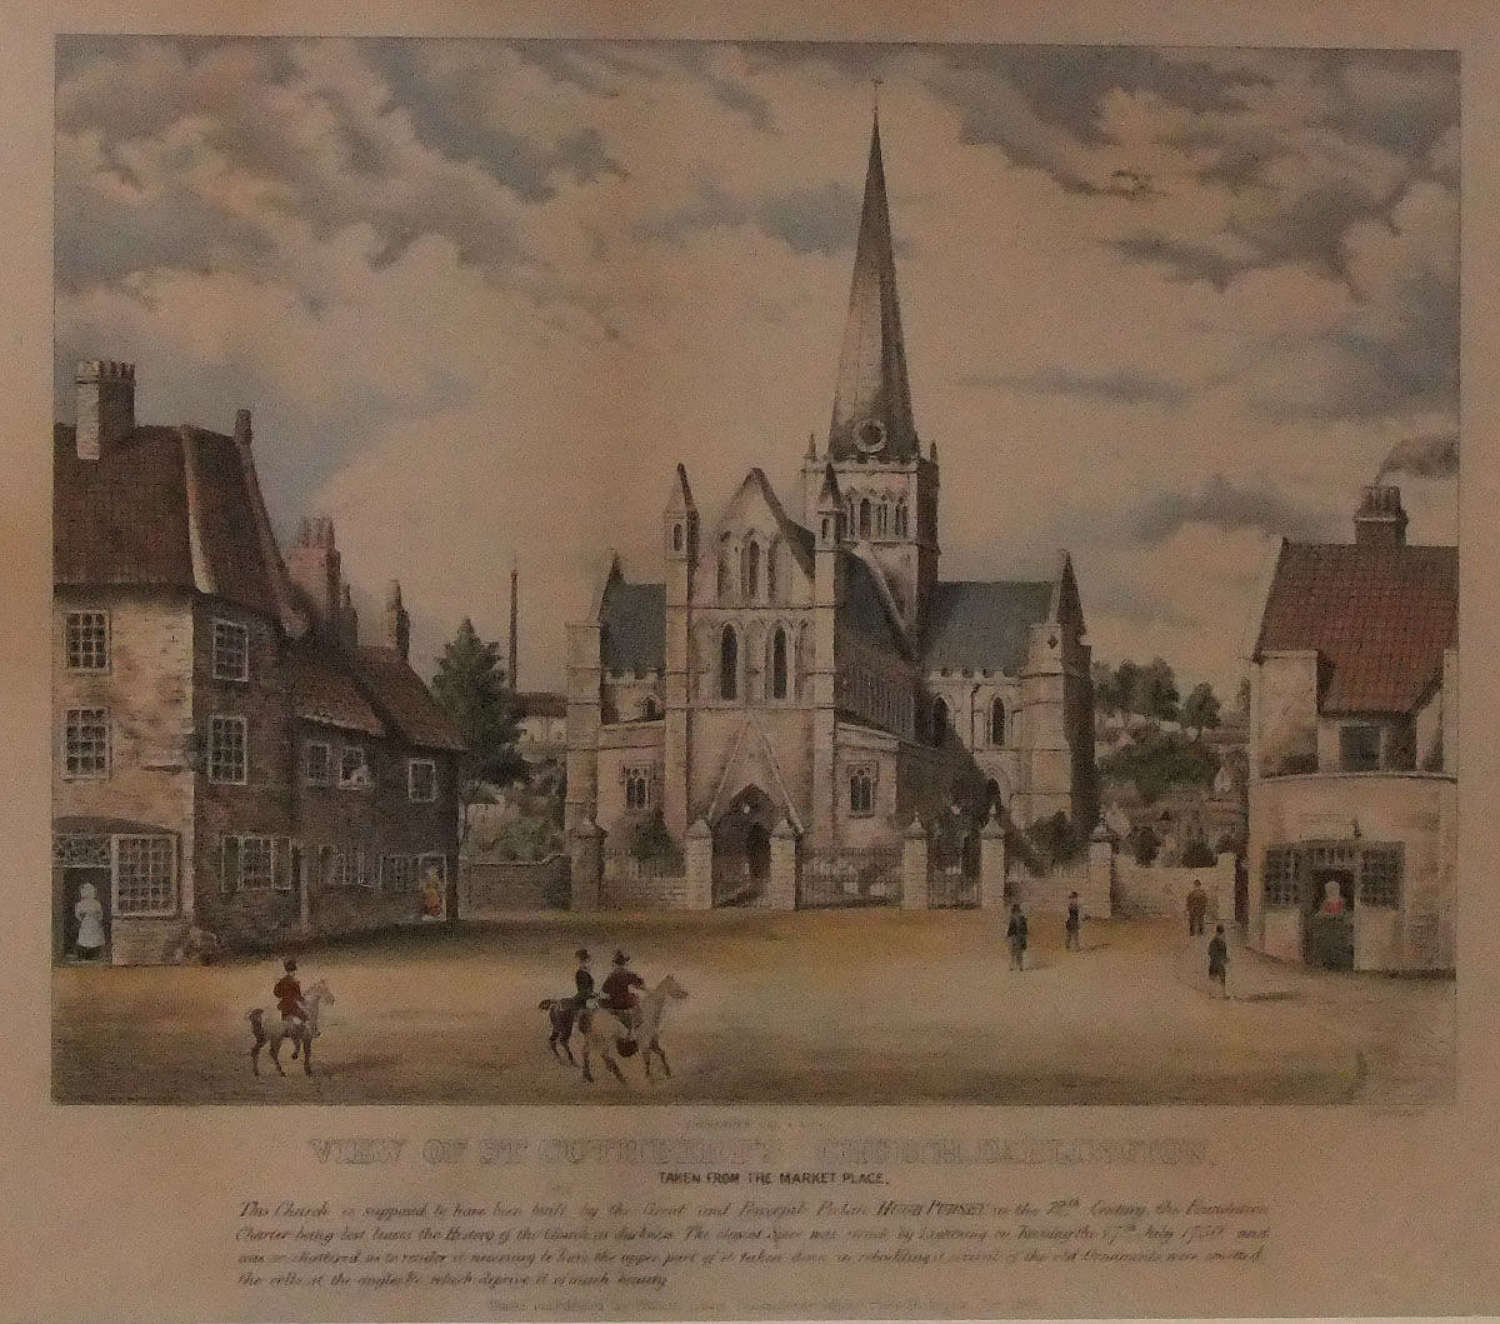 J.C.Napper Del. & Lith. - VIEW OF ST. CUTHBERT'S CHURCH, DARLINGTON & OLD TOWN HALL